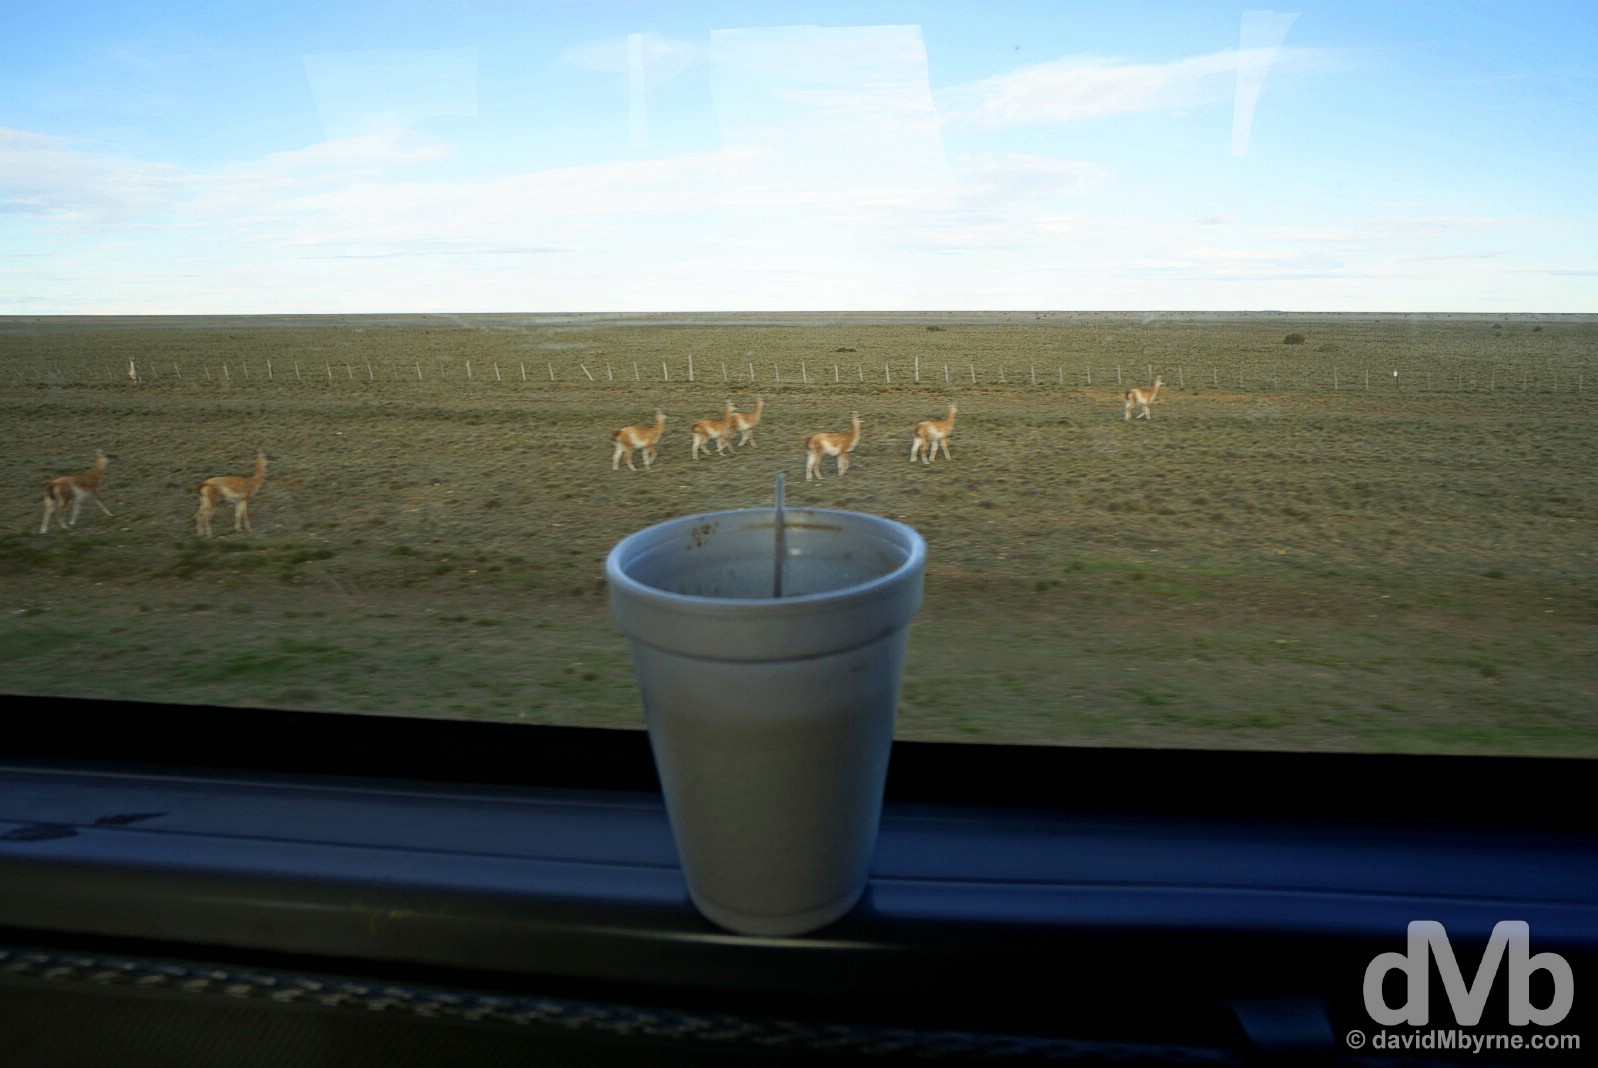 Morning Coffee & steppe views heading south on Ruta 3 in Patagonia, Argentina. November 1, 2015.